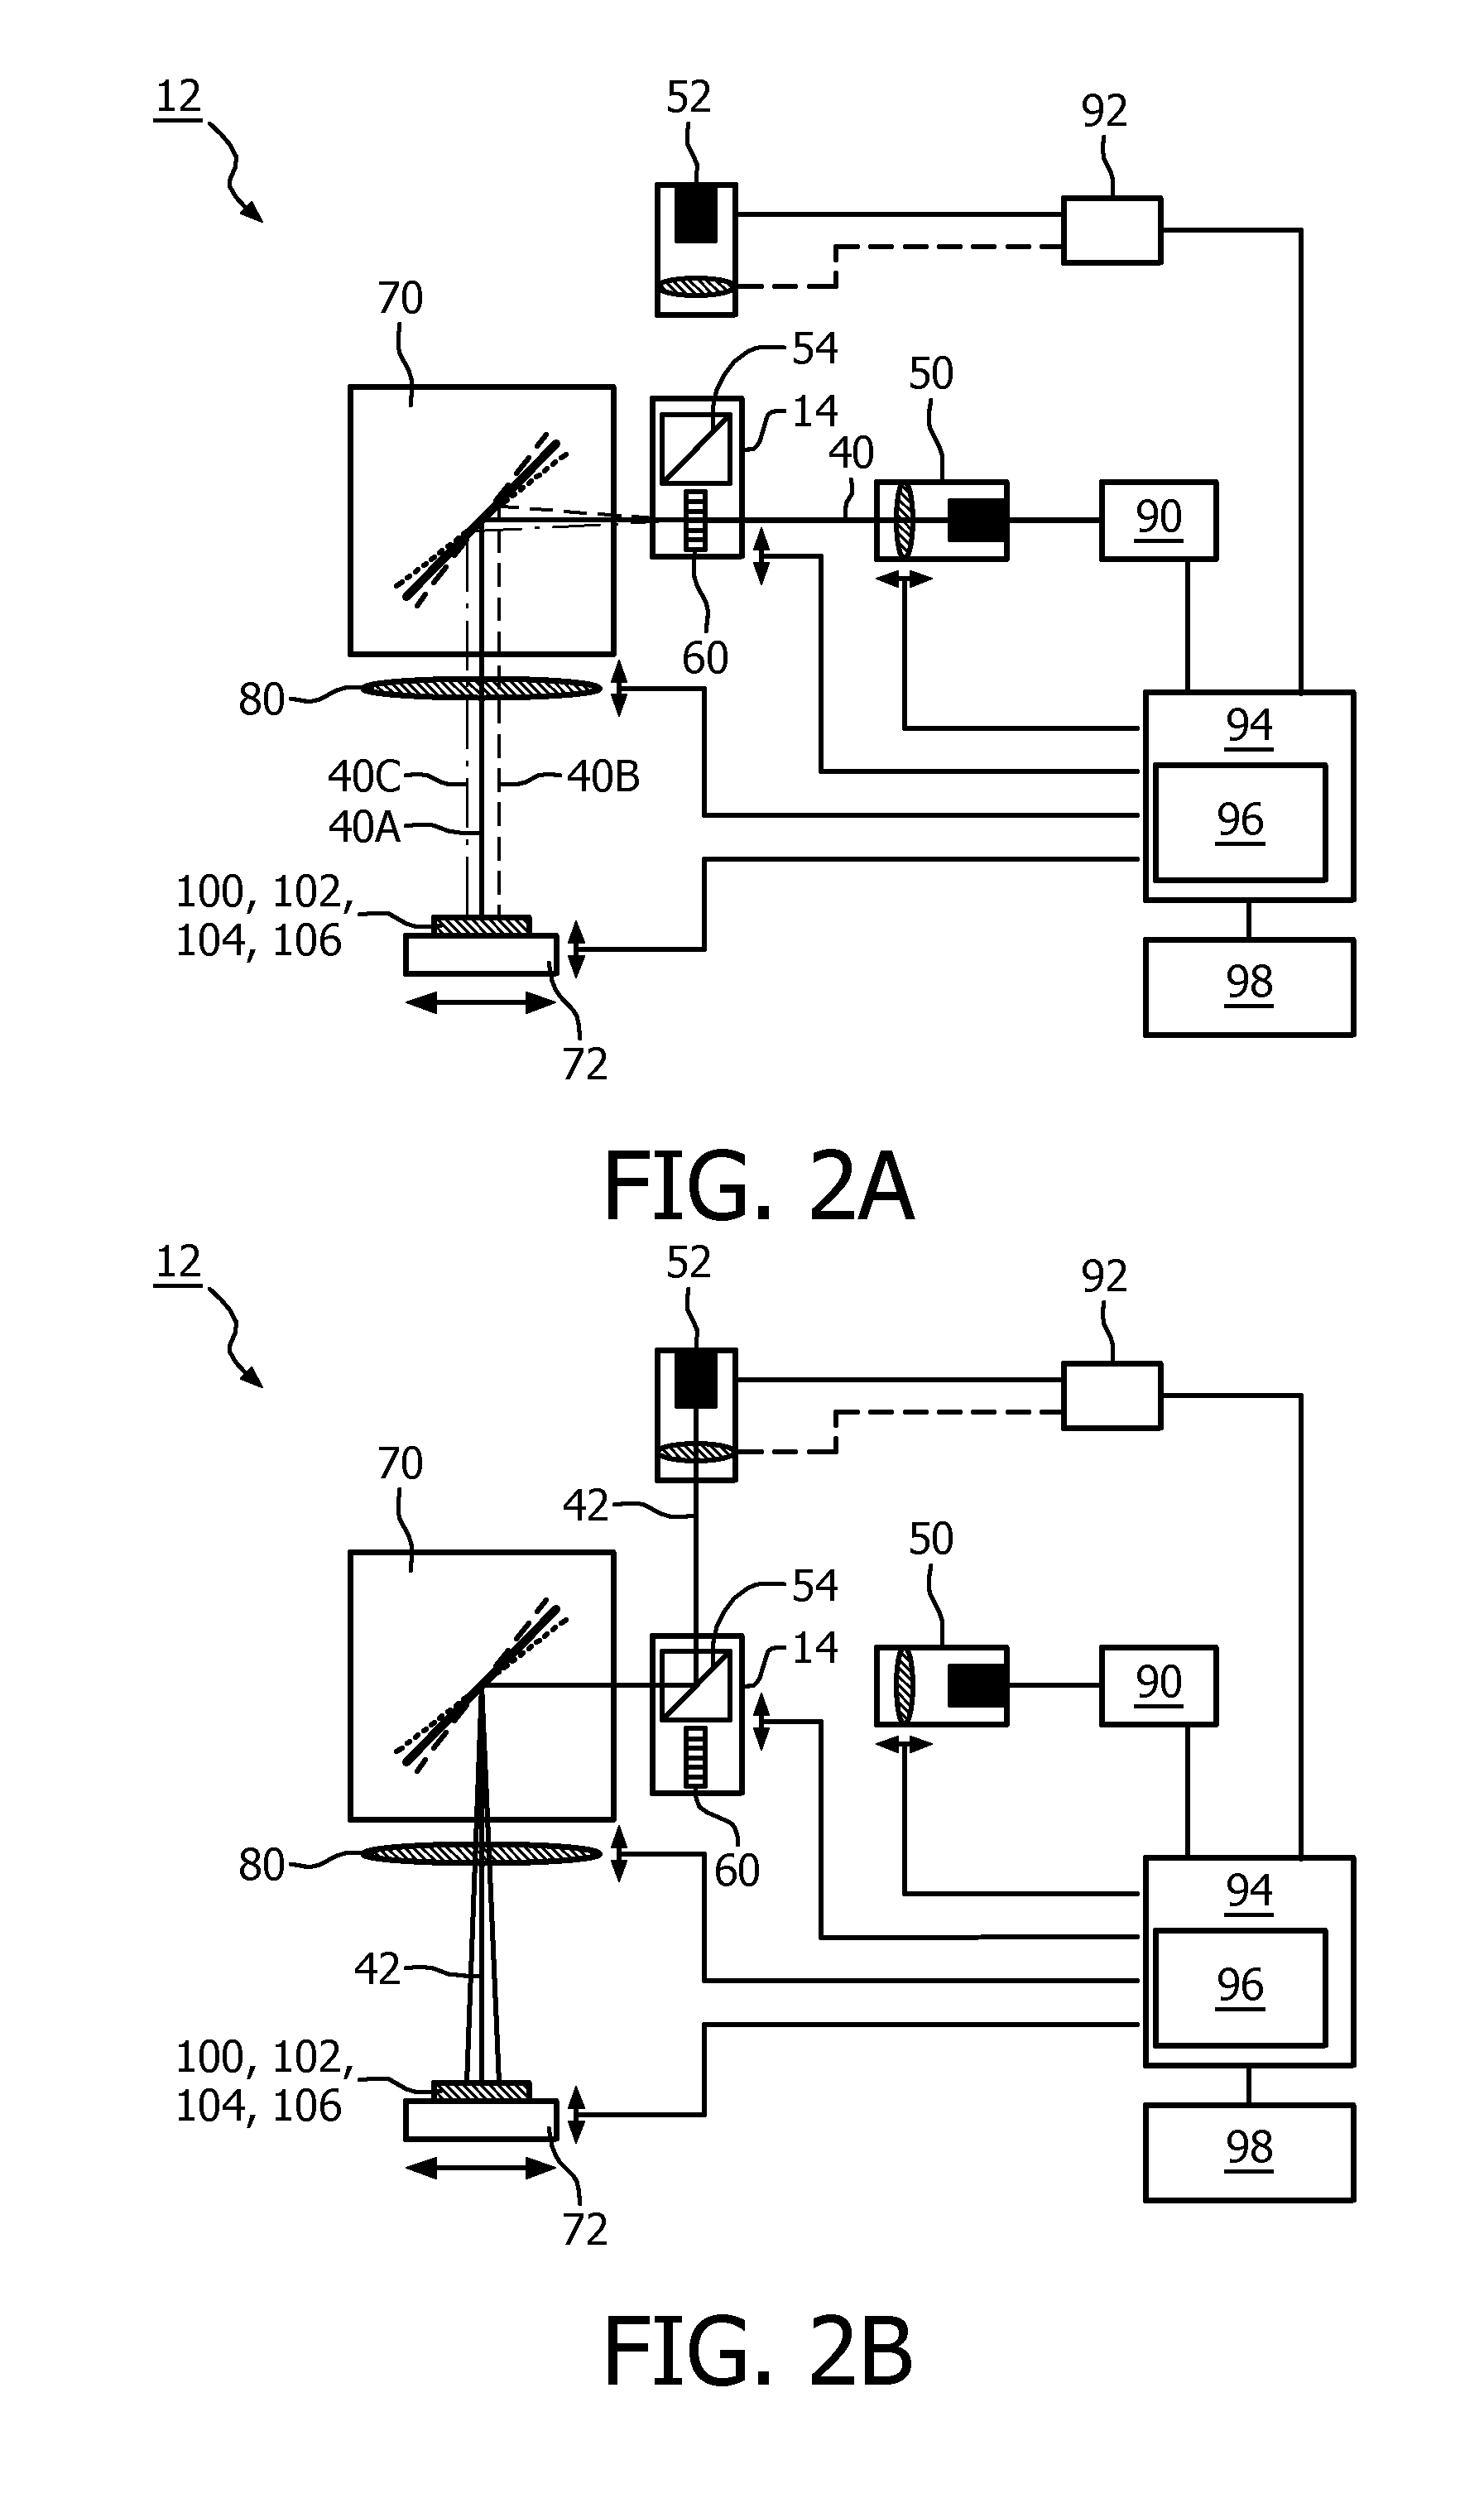 Patterning device for generating a pattern in and/or on a layer